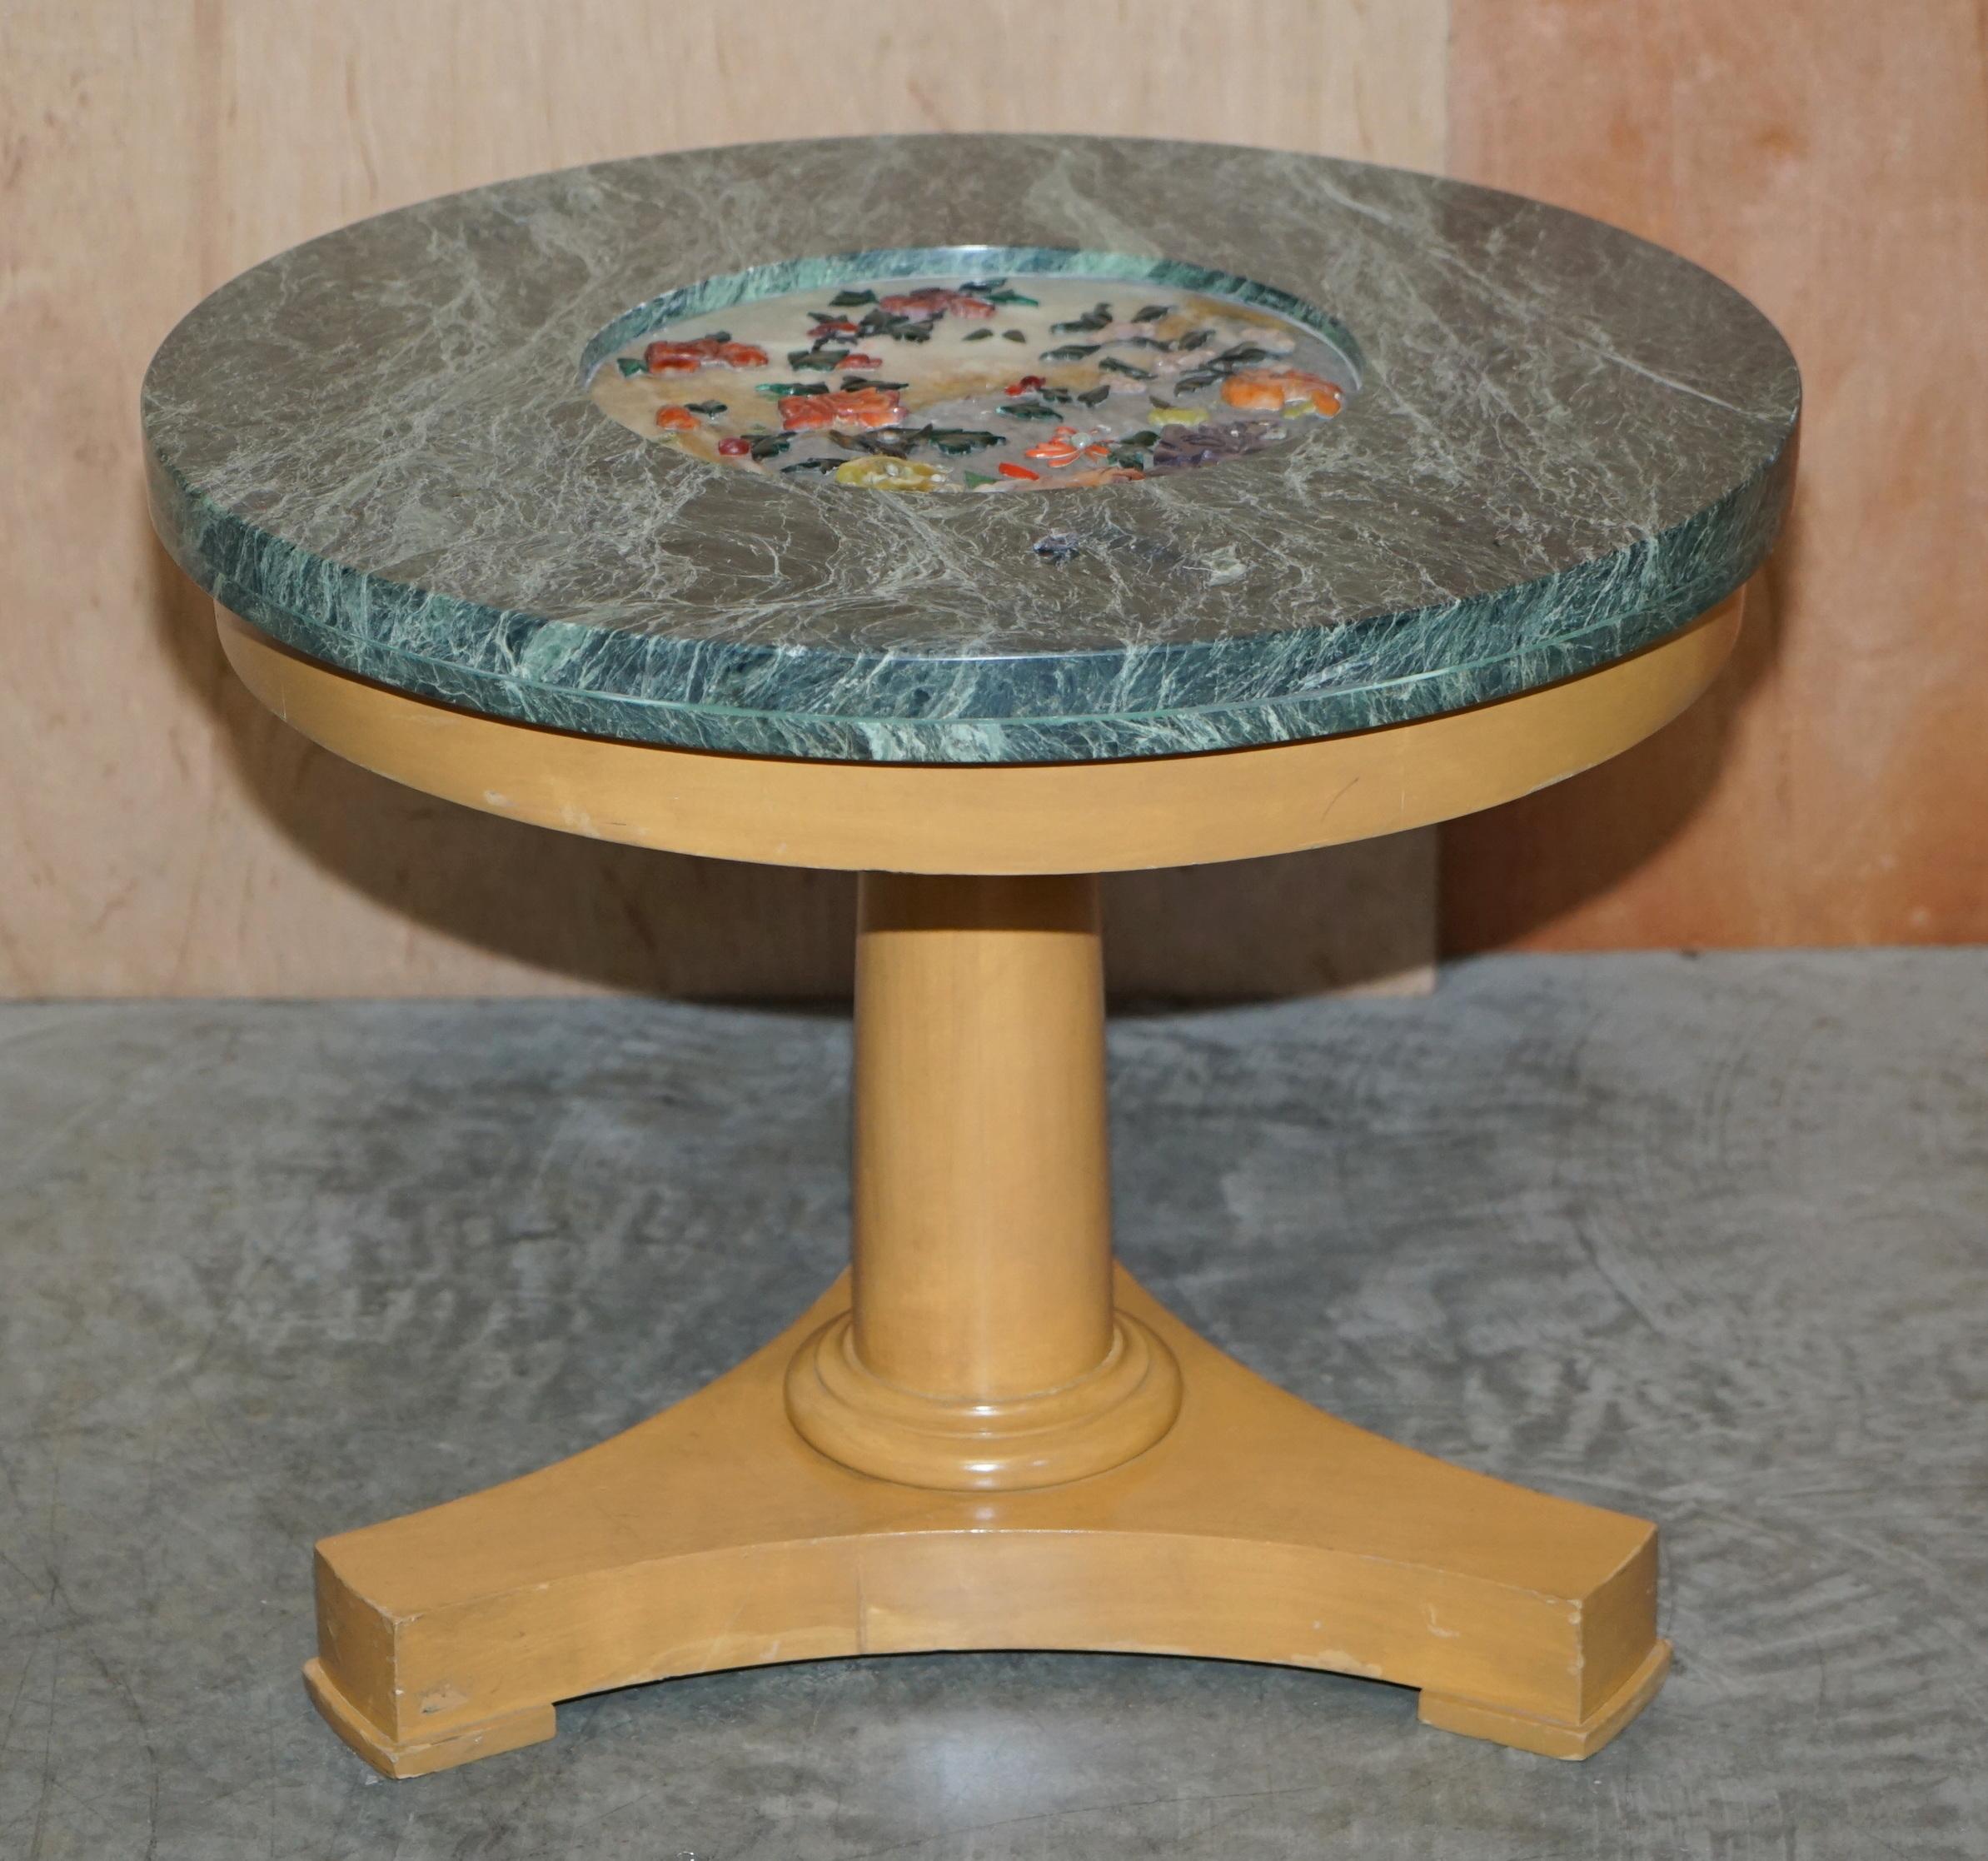 Country Pair of Walnut Side Tables with Green Marble Tops Inset with Hardstone Flowers